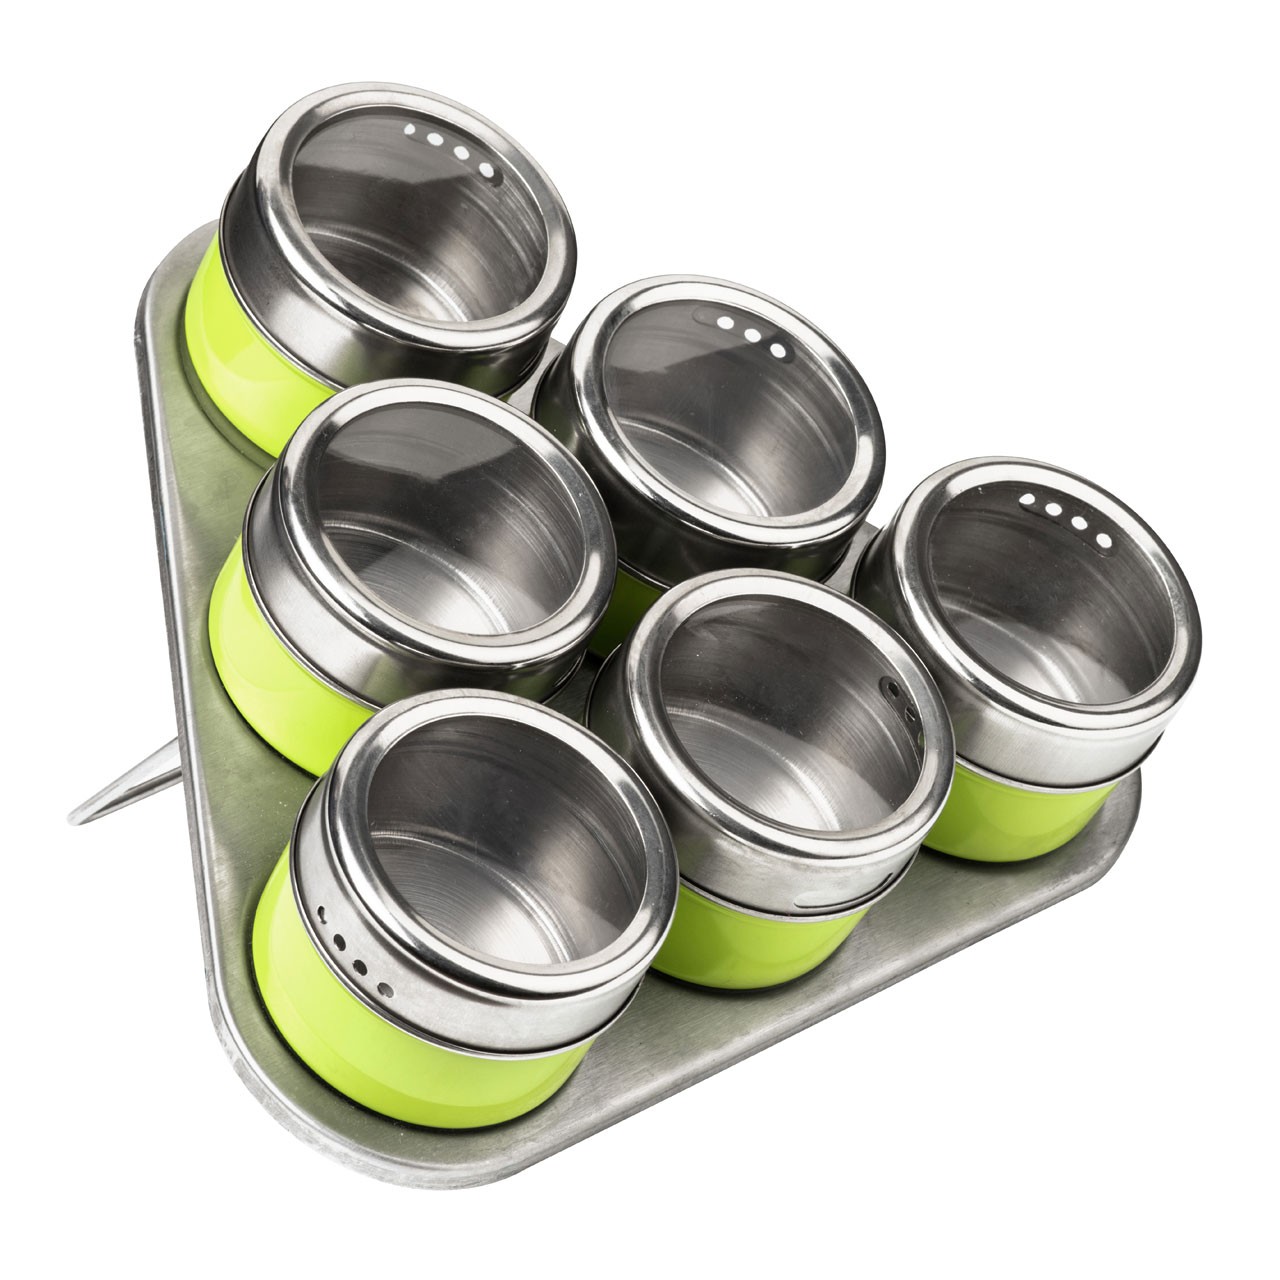 Magnetic Tray with 6 Spice Jars - Lime Green